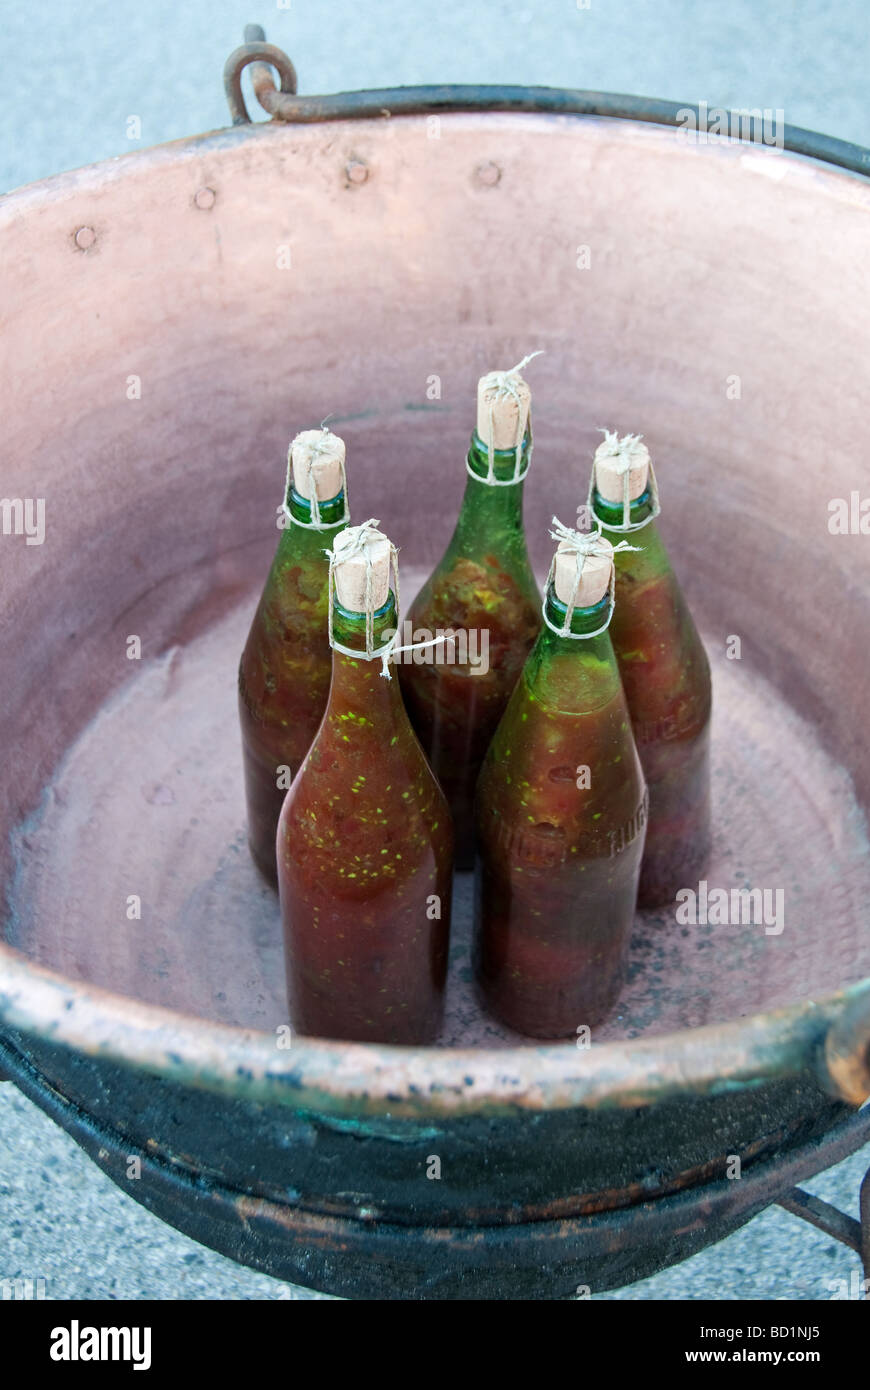 demonstration of old fashioned method for making and preserving tomato puree and bottling it Stock Photo